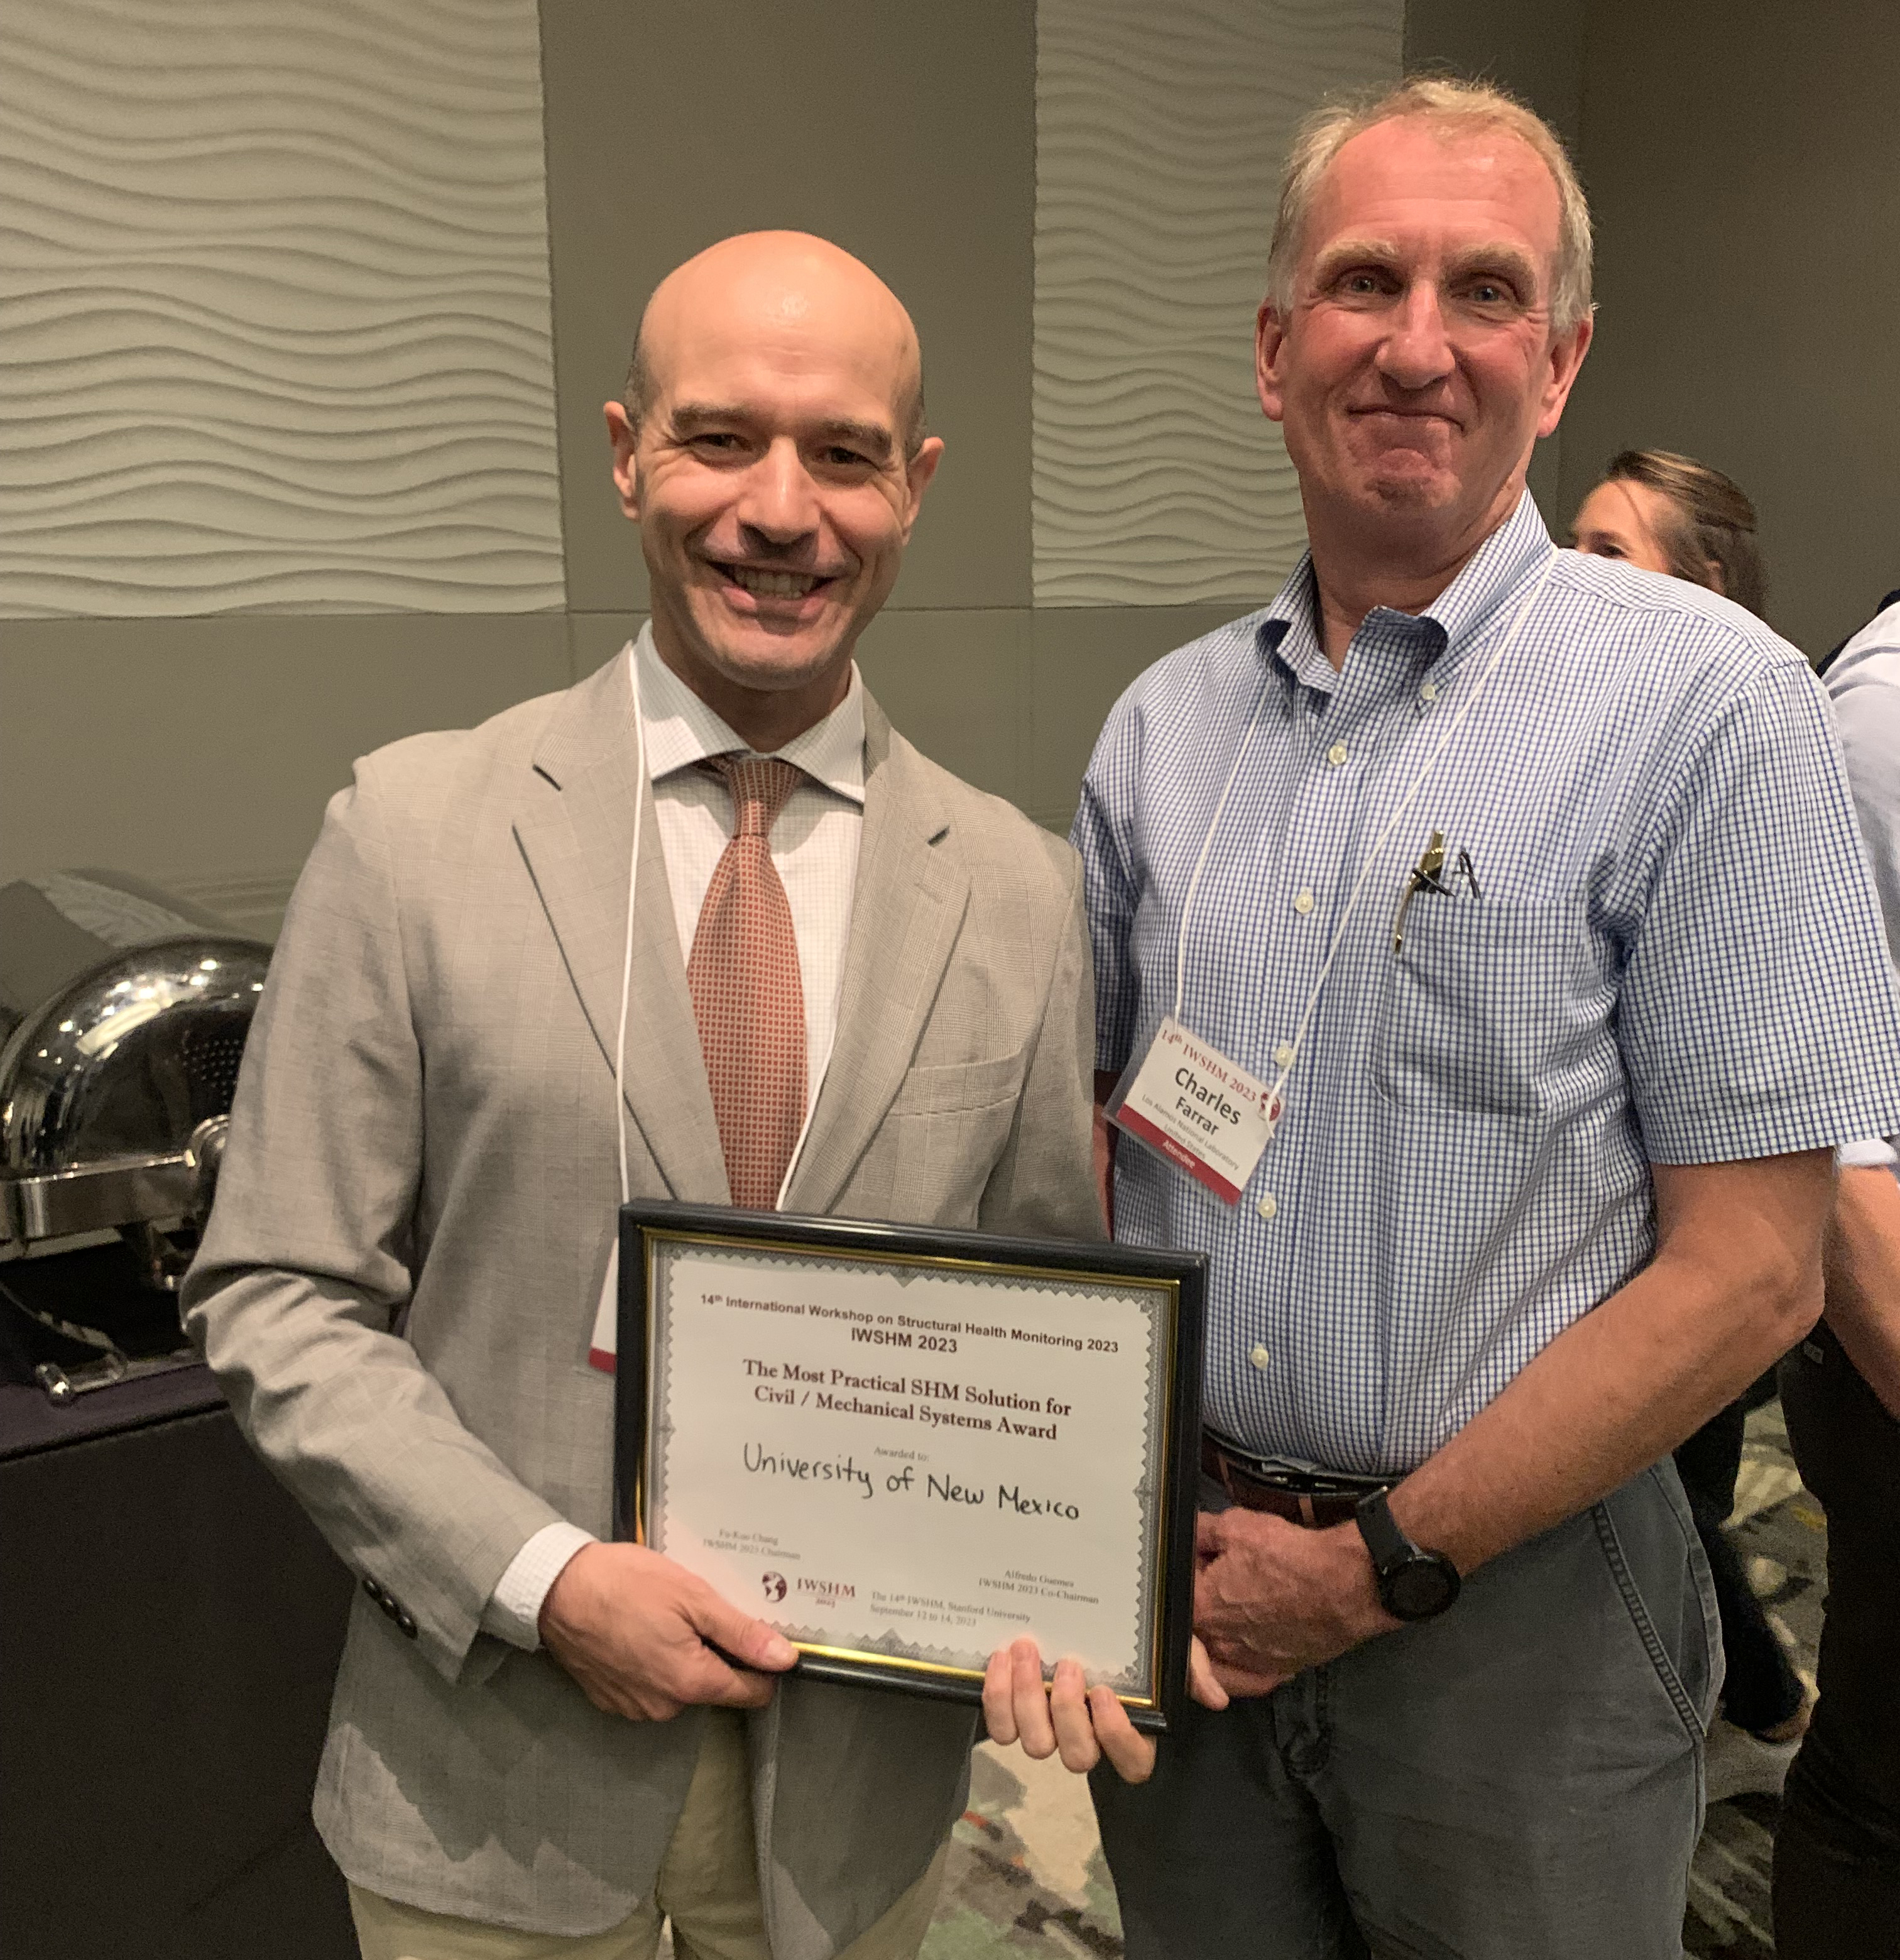 photo: Fernando Moreu with Chuck Farrar after receiving the SHM in Action award at Palo Alto on Sept. 13. Farrar is a UNM alumni in civil engineering and the director of the Engineering Institute at Los Alamos National Laboratory.